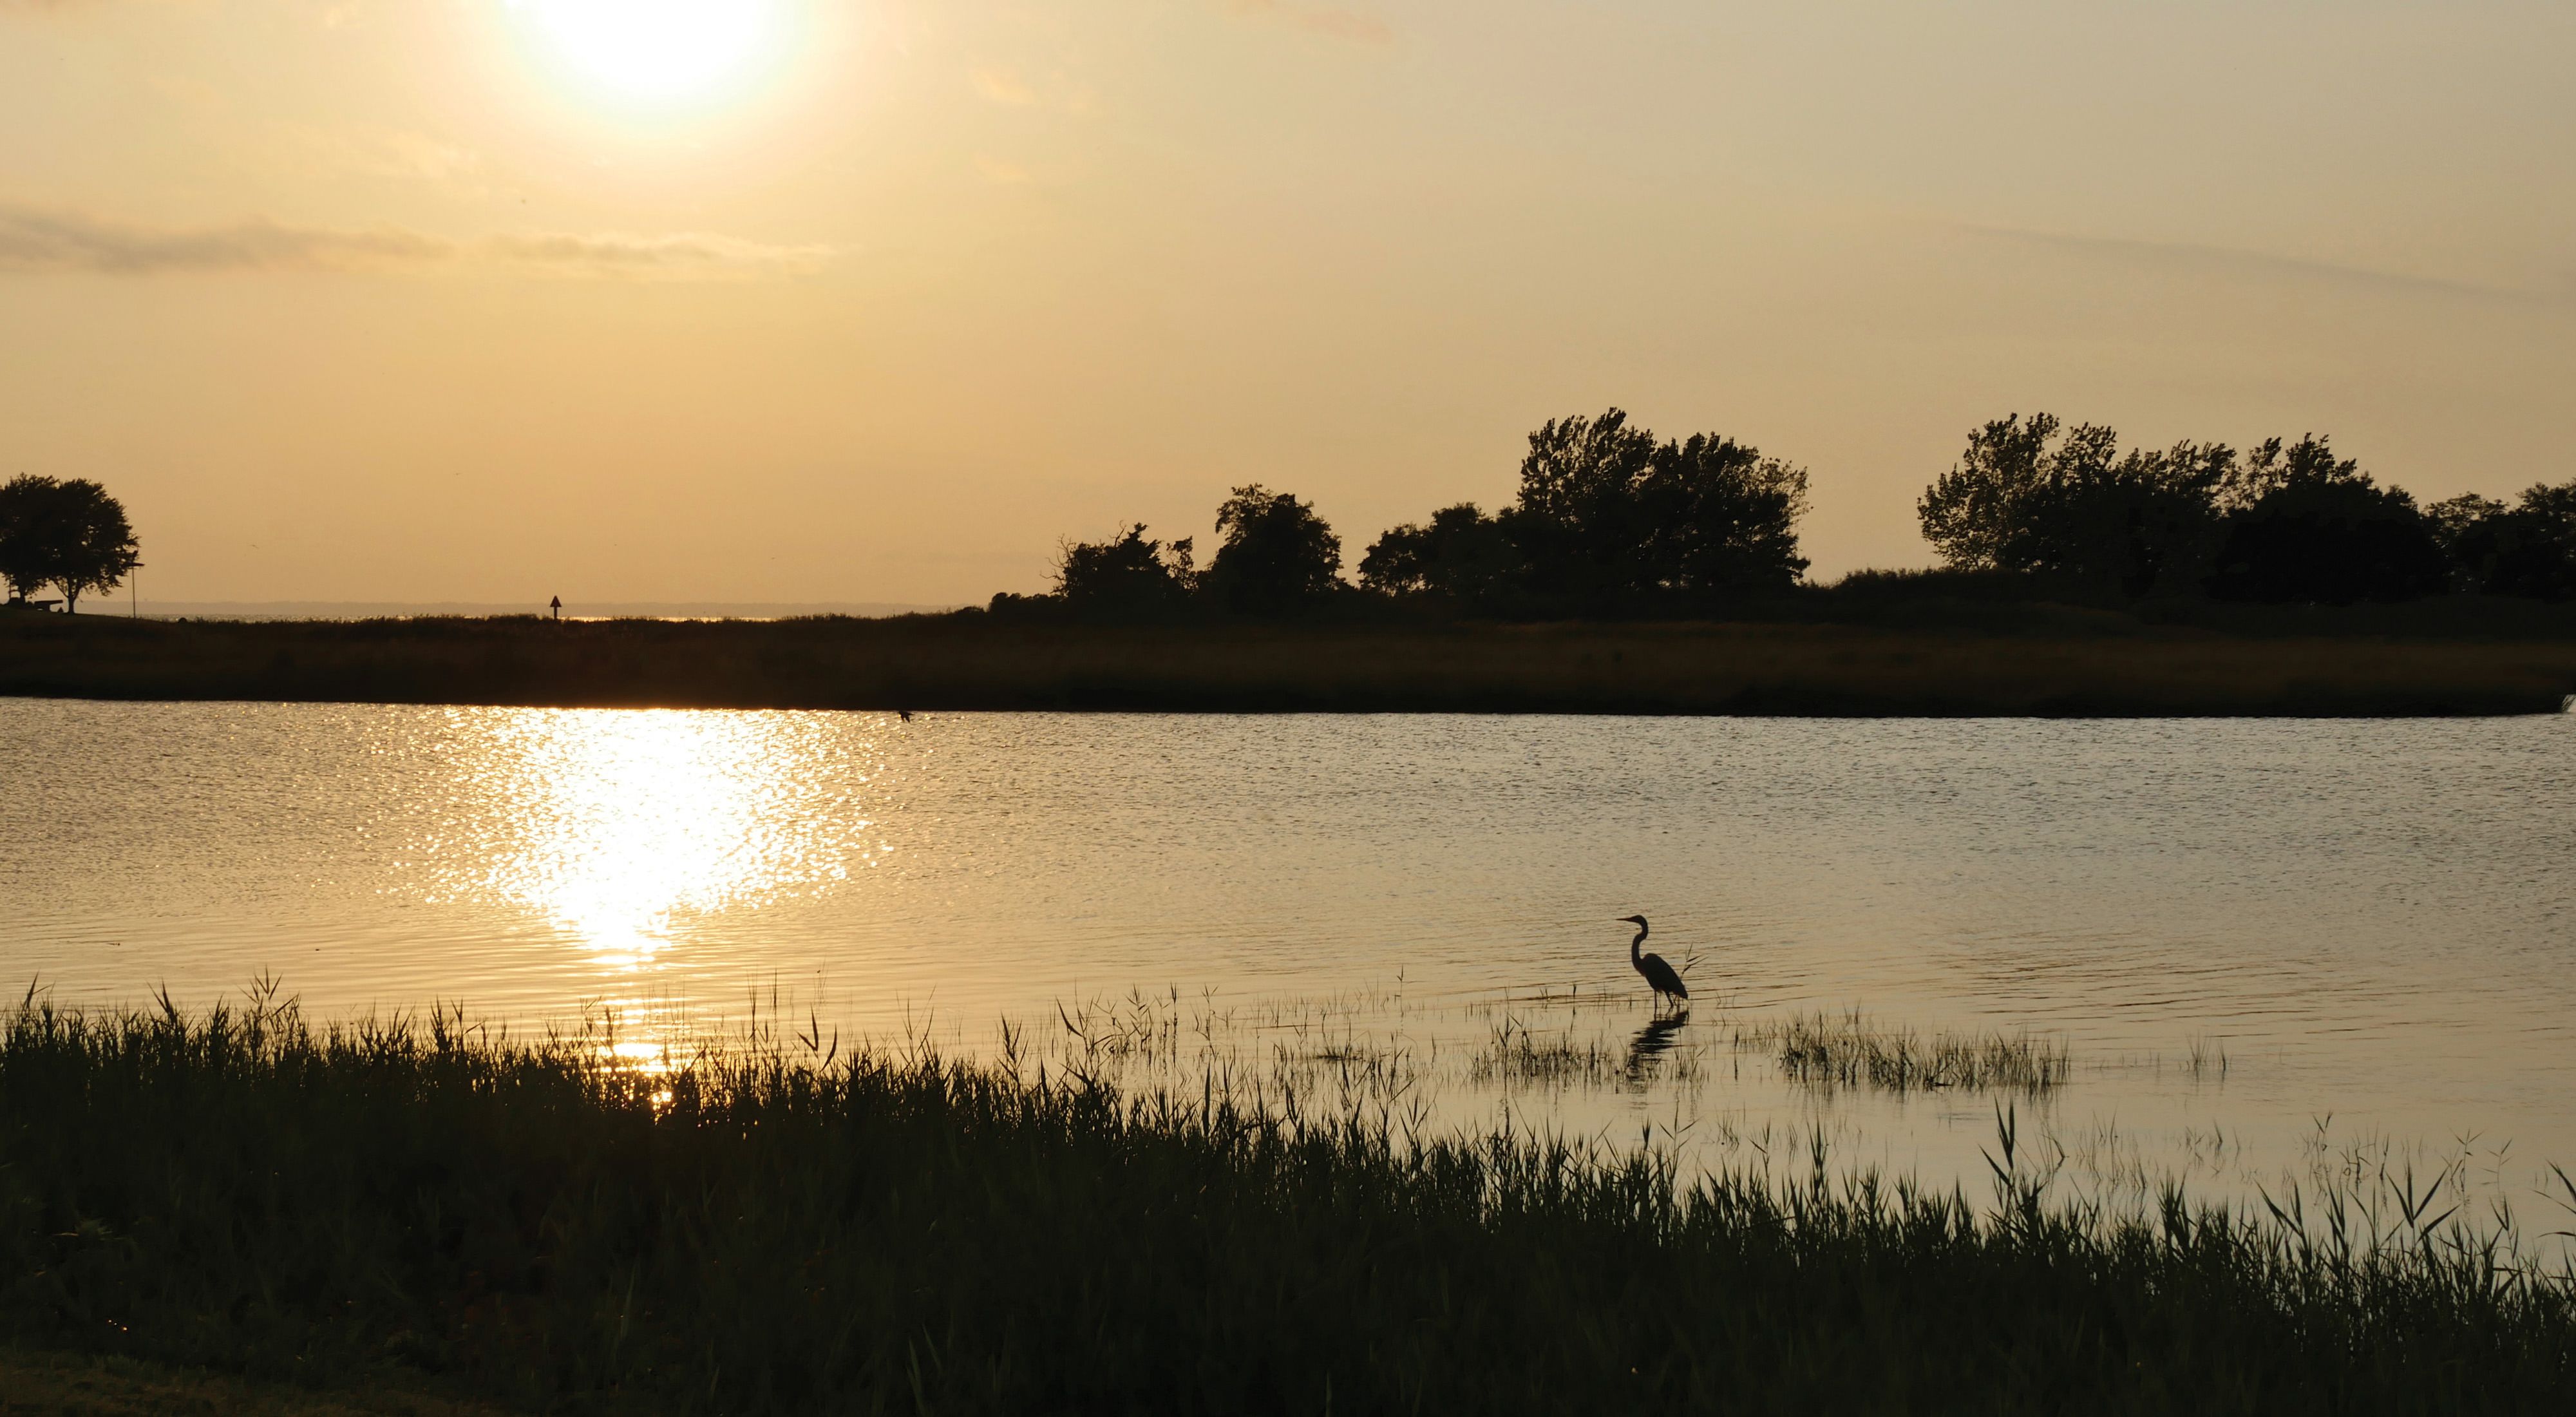 A Chesapeake Bay inlet at sunset. The sky and light cast on the scene are orange. An egret is silhouetted against the water. The sun's reflection on the water shows ripples on its surface.